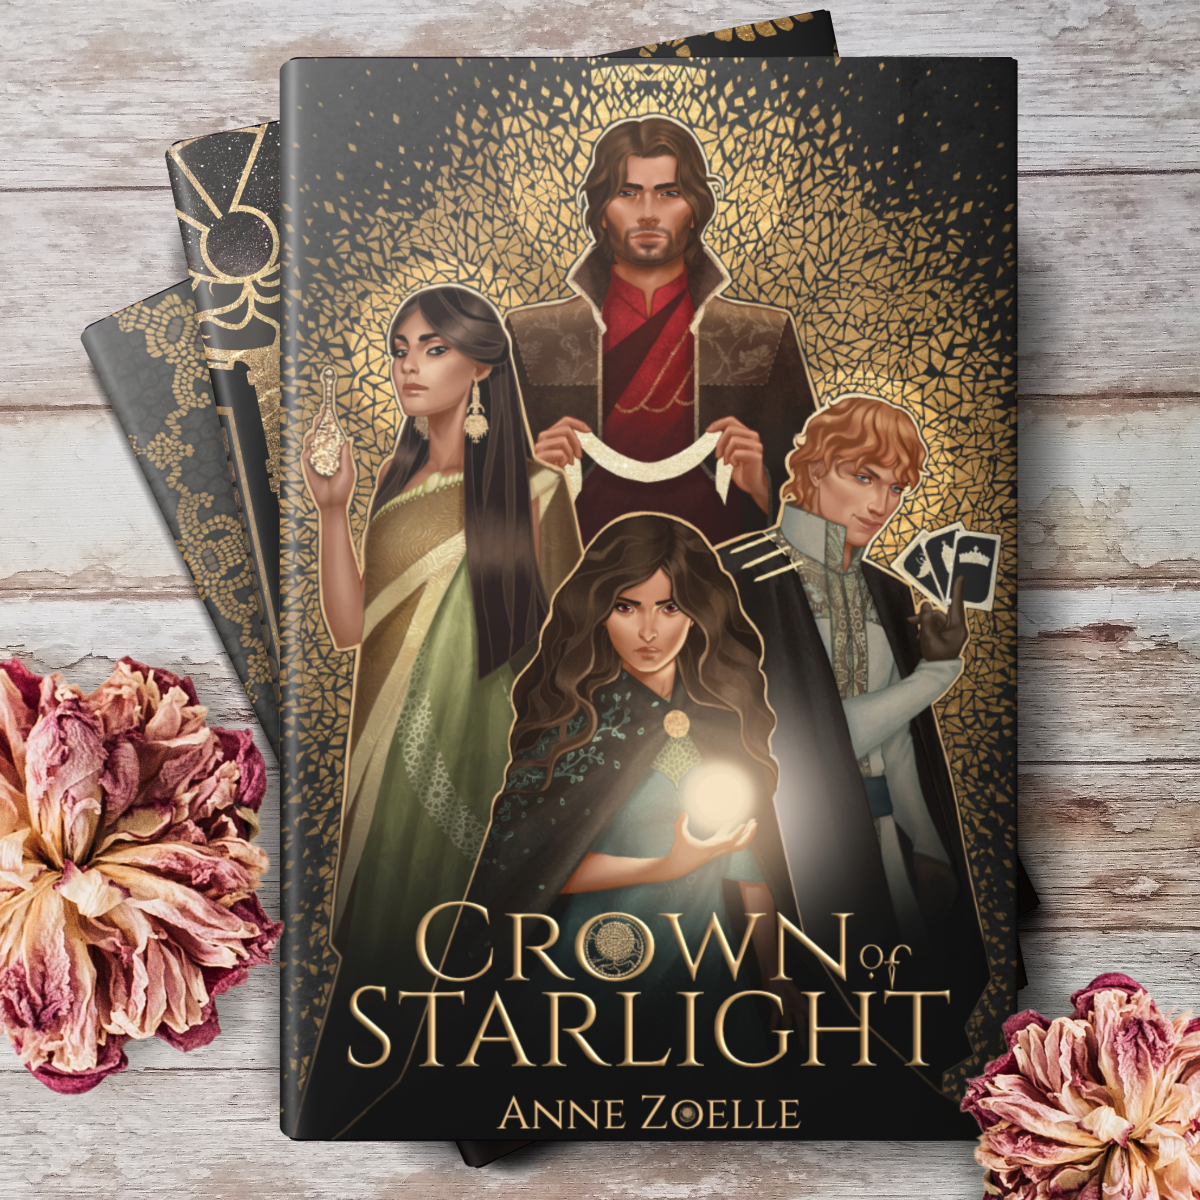 Crown of Starlight book cover on a stack of books